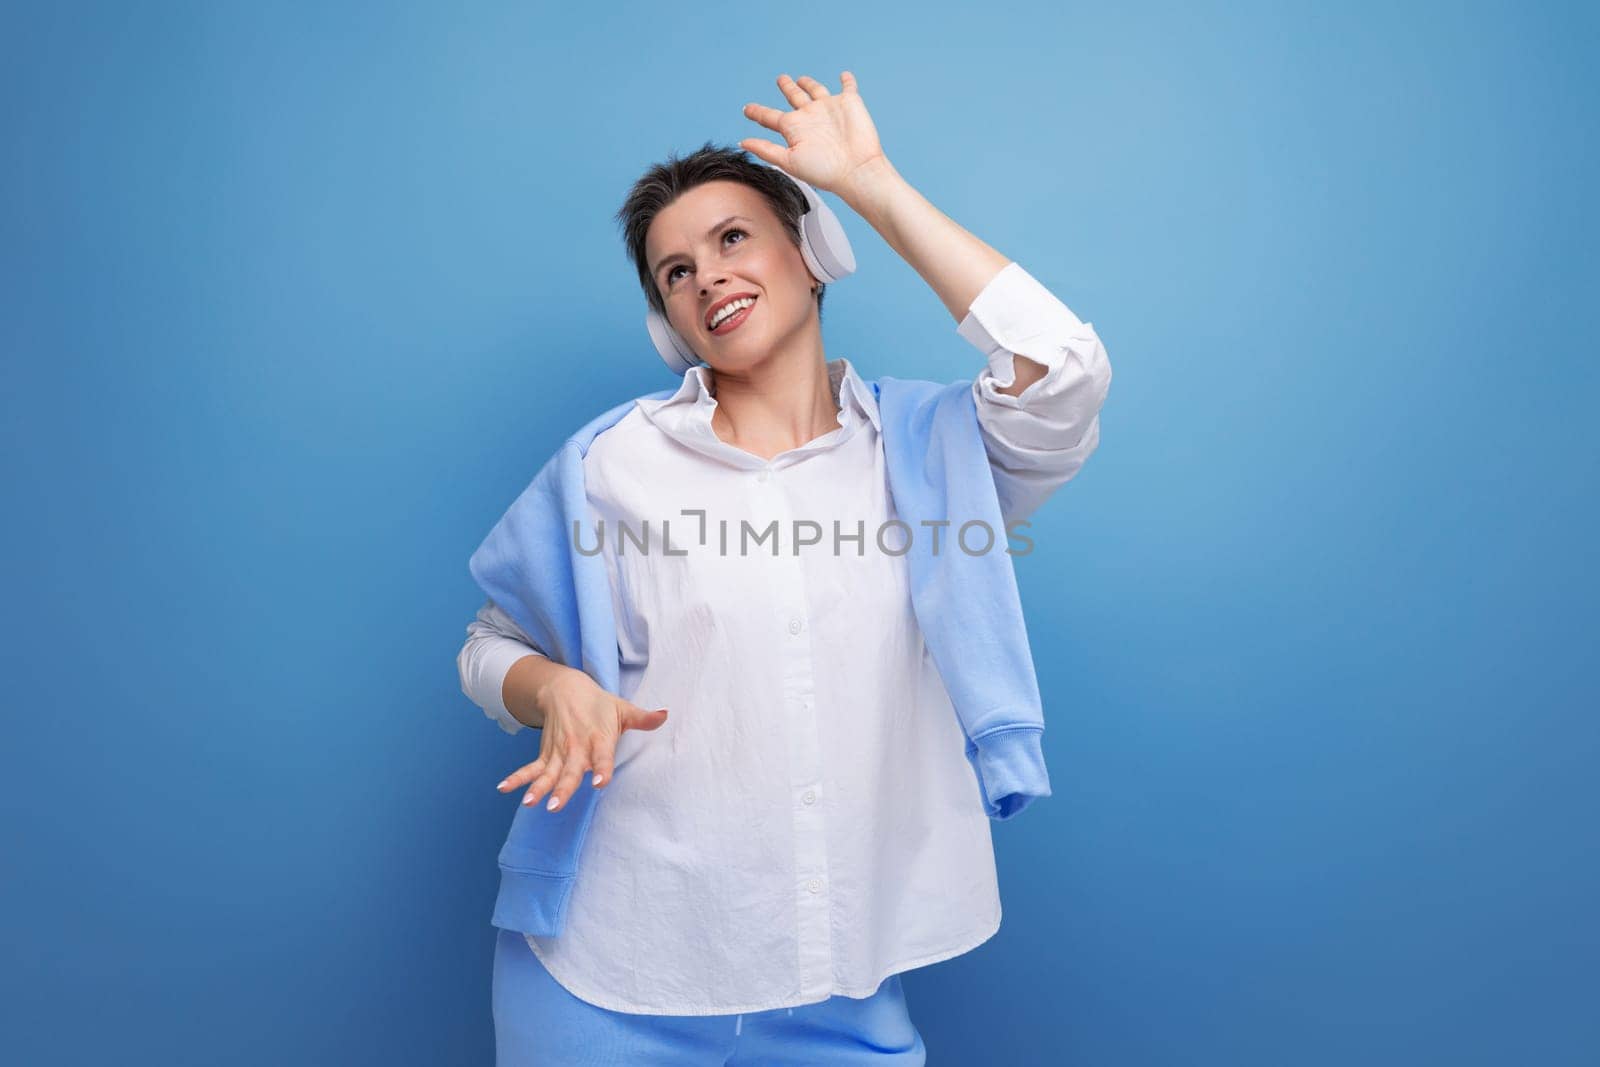 stylish young woman with short haircut enjoying music in headphones on studio background with copy space.